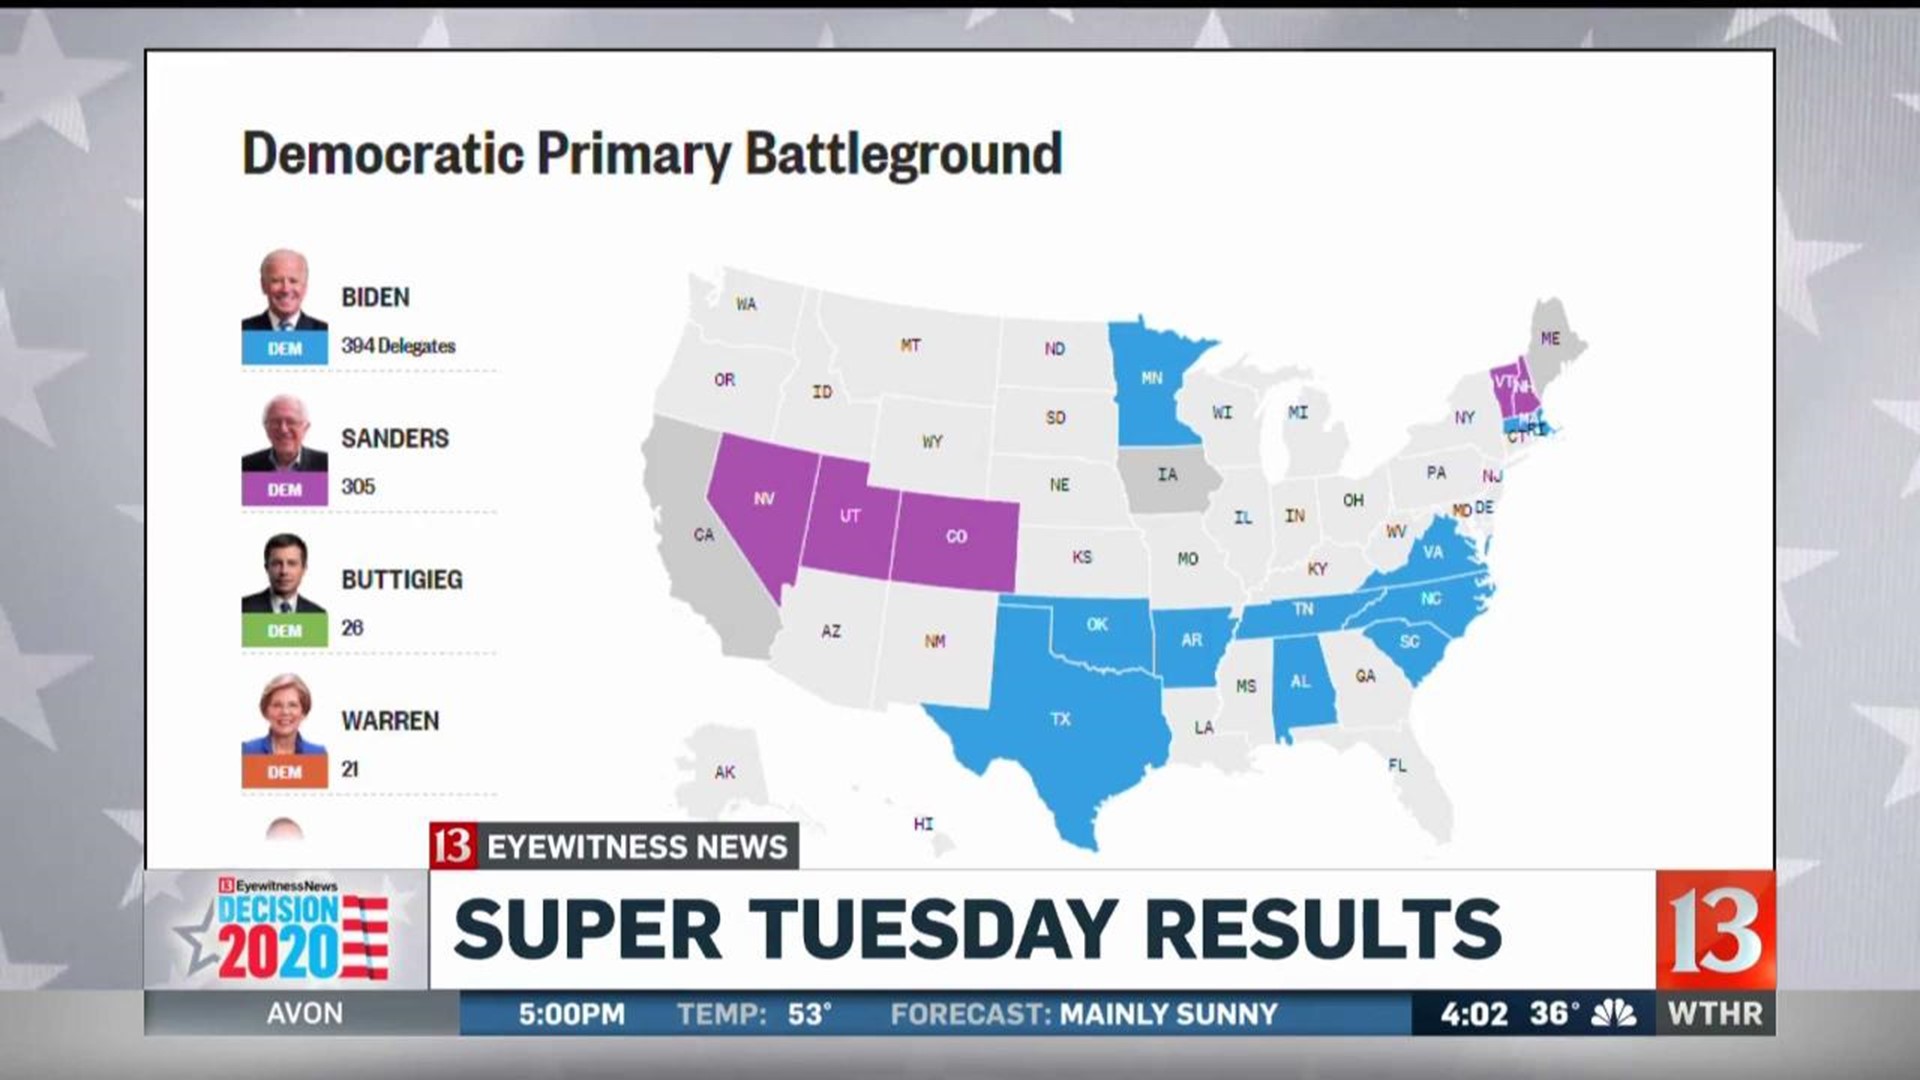 Super Tuesday results: Biden takes 10 states, Sanders takes 4 